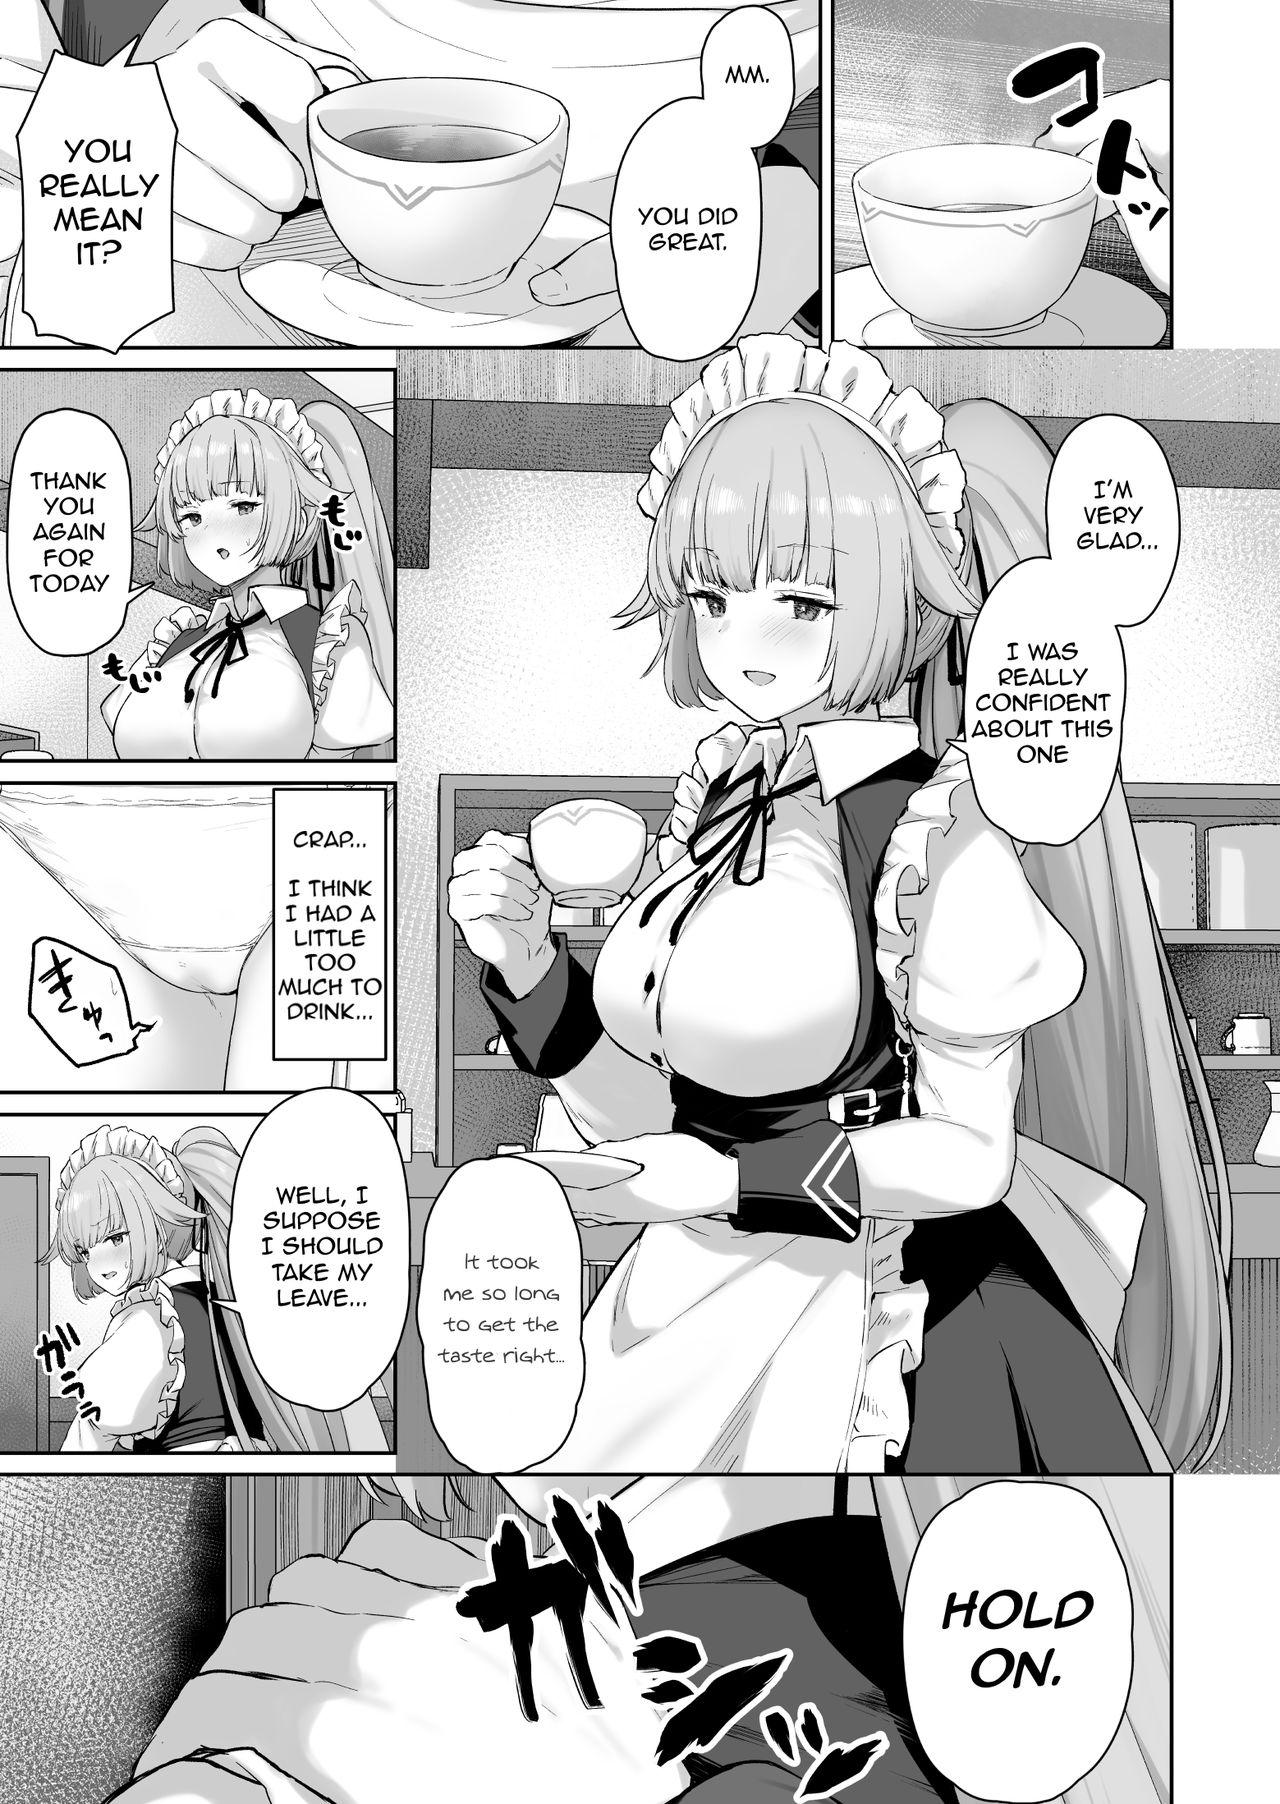 Doggy NTW-20 - Girls frontline Fake Tits - Page 1